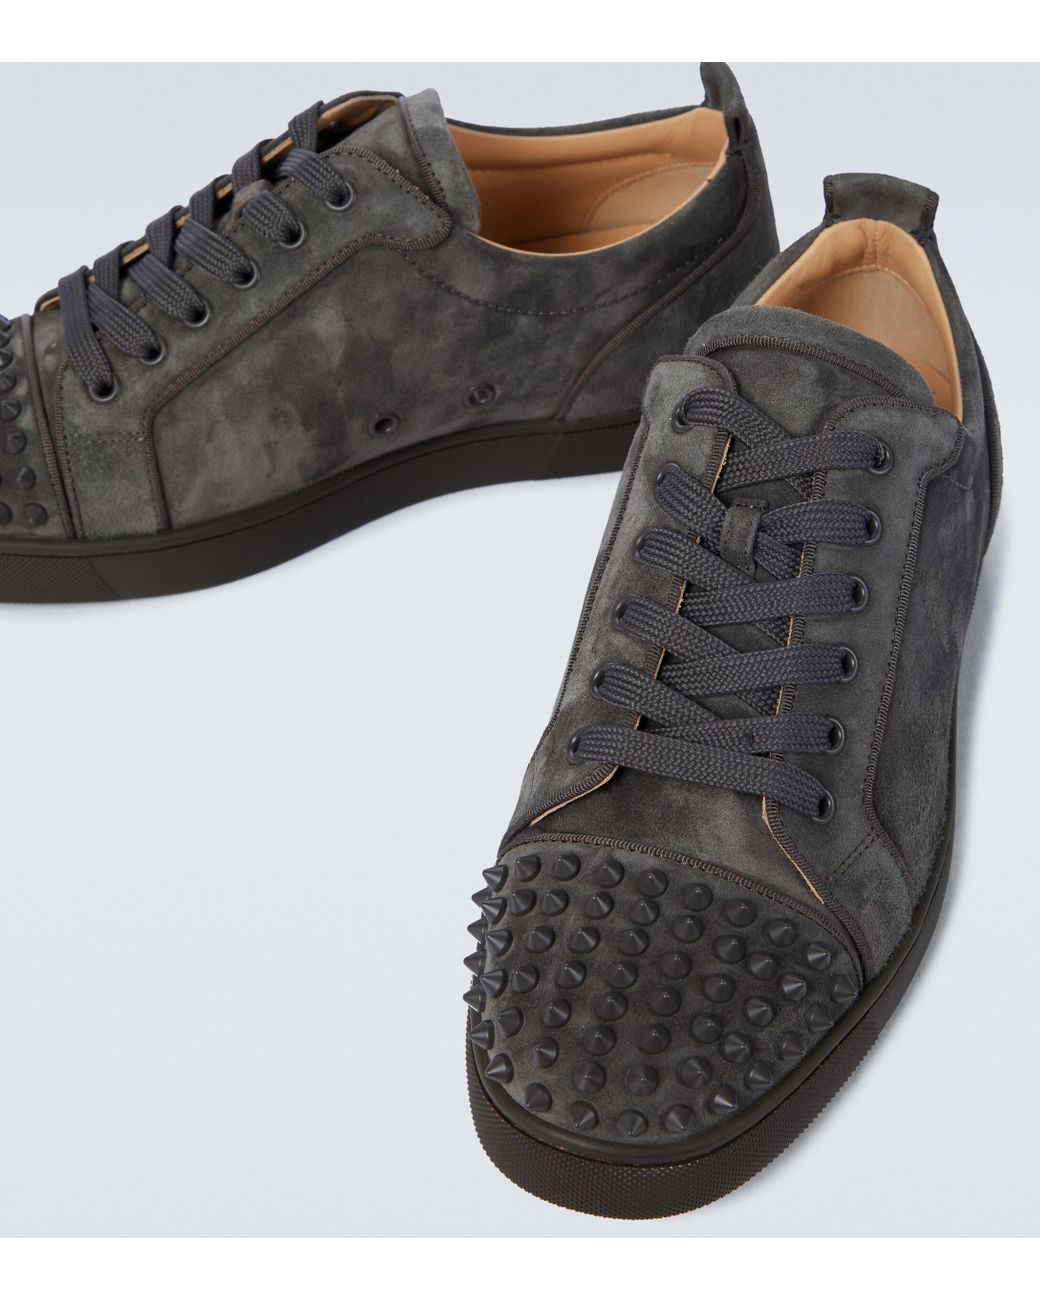 Christian Louboutin Suede Louis Spikes Orlato Sneakers in Grey (Gray) for Men - Lyst